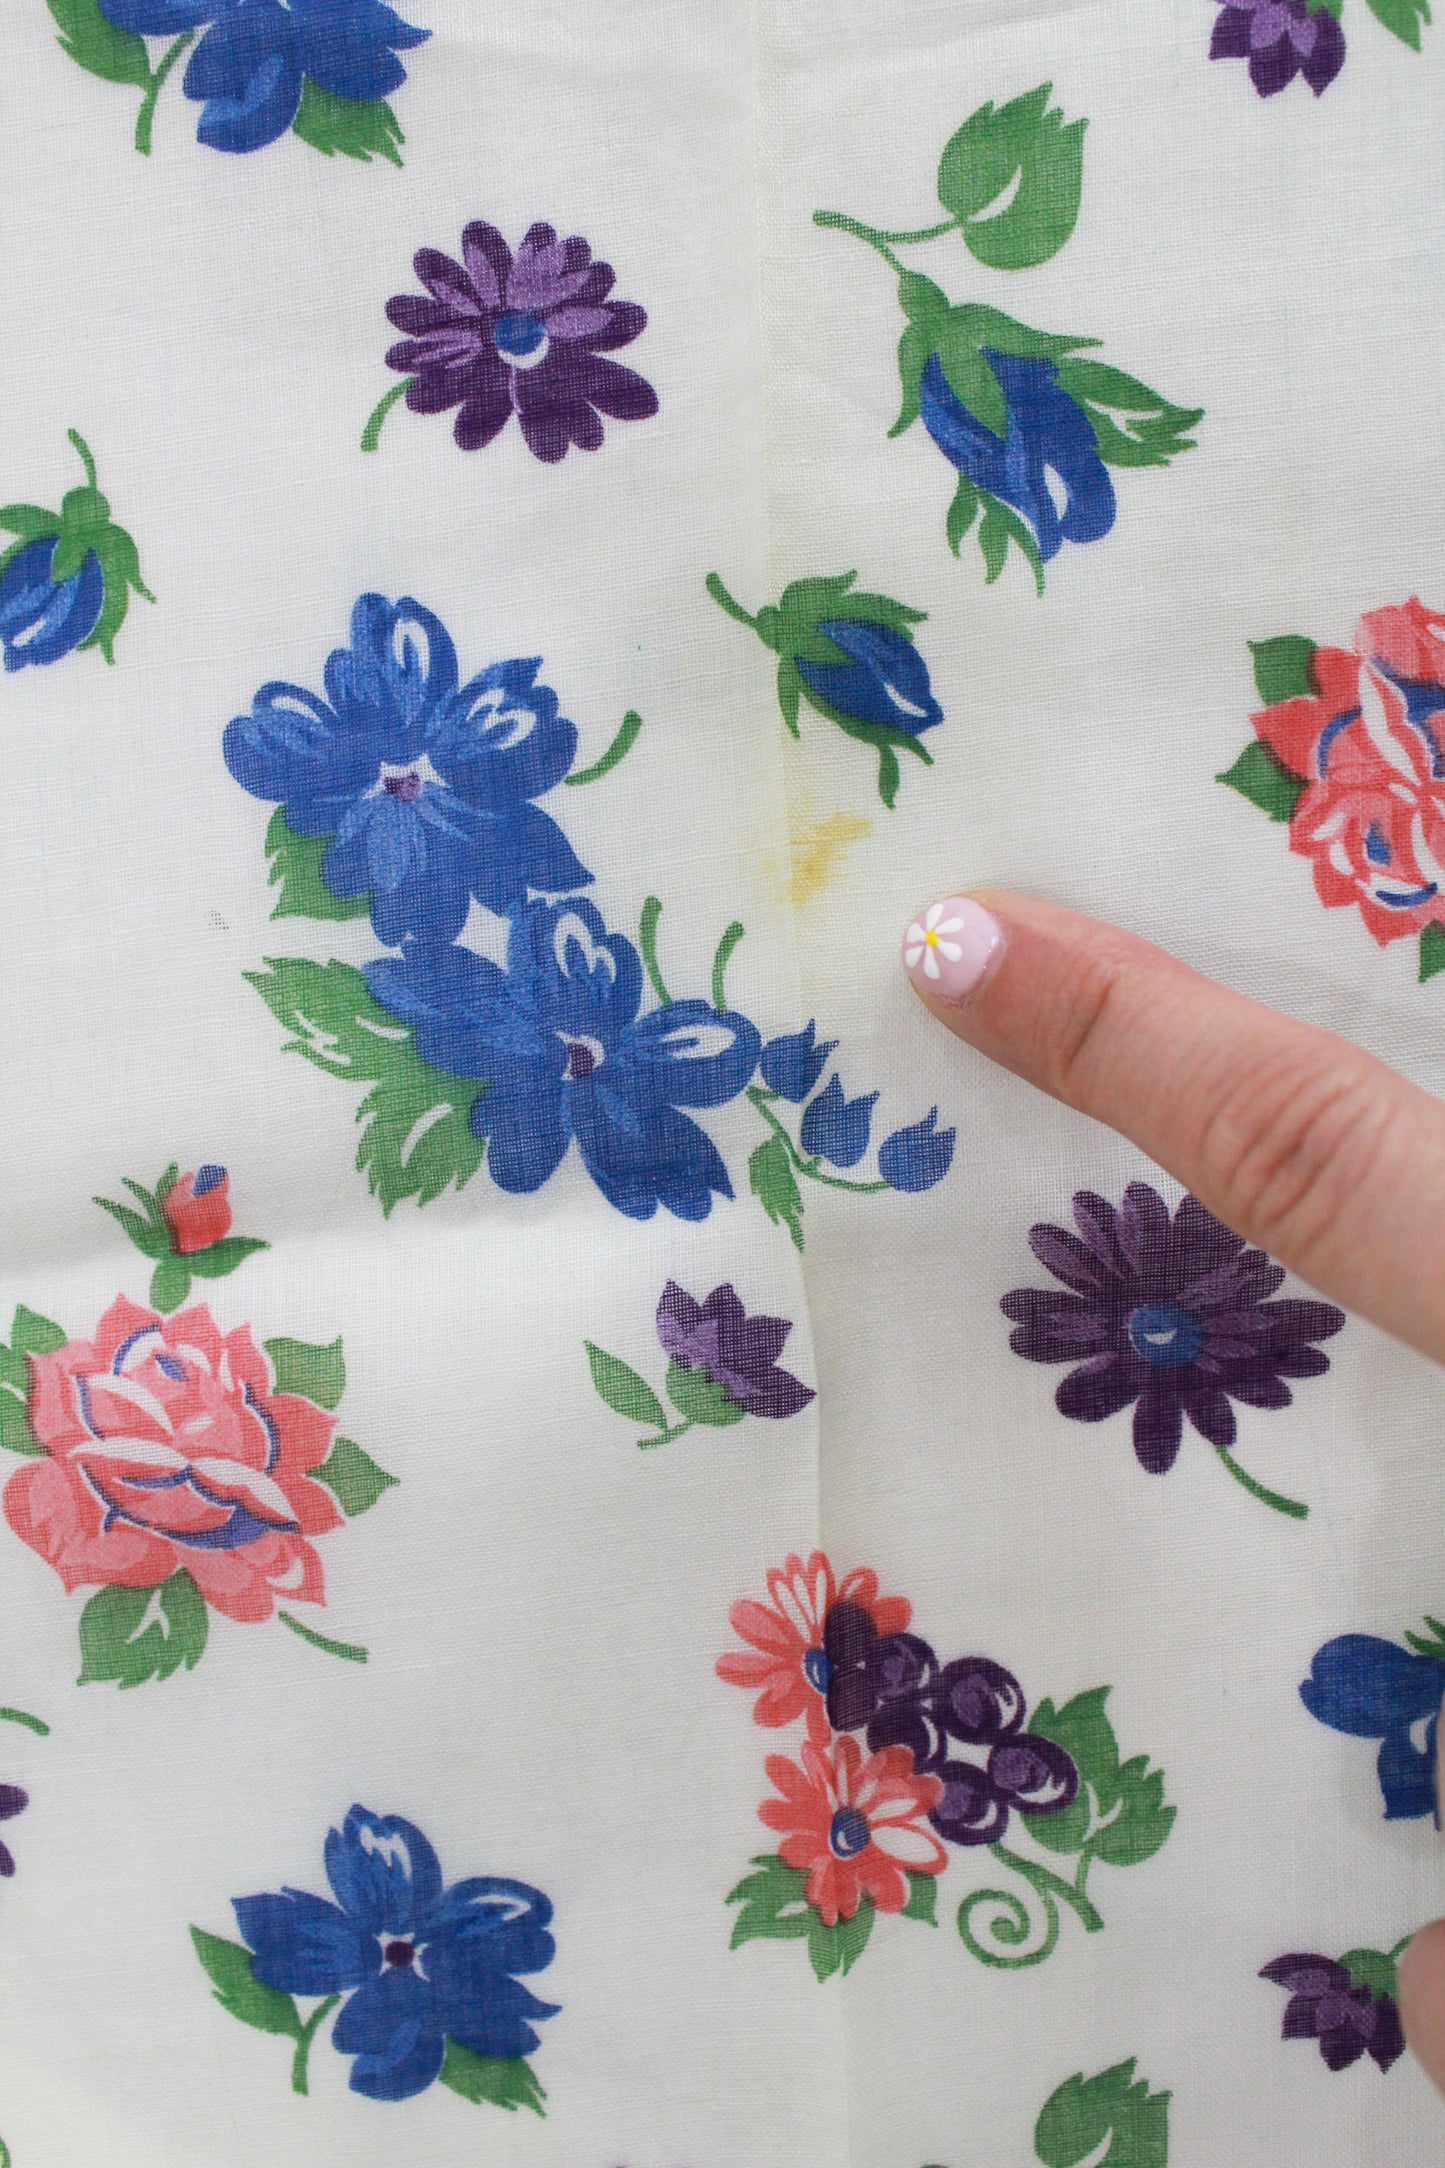 1940s Sheer Floral Print Cotton Fabric, 10 Yards